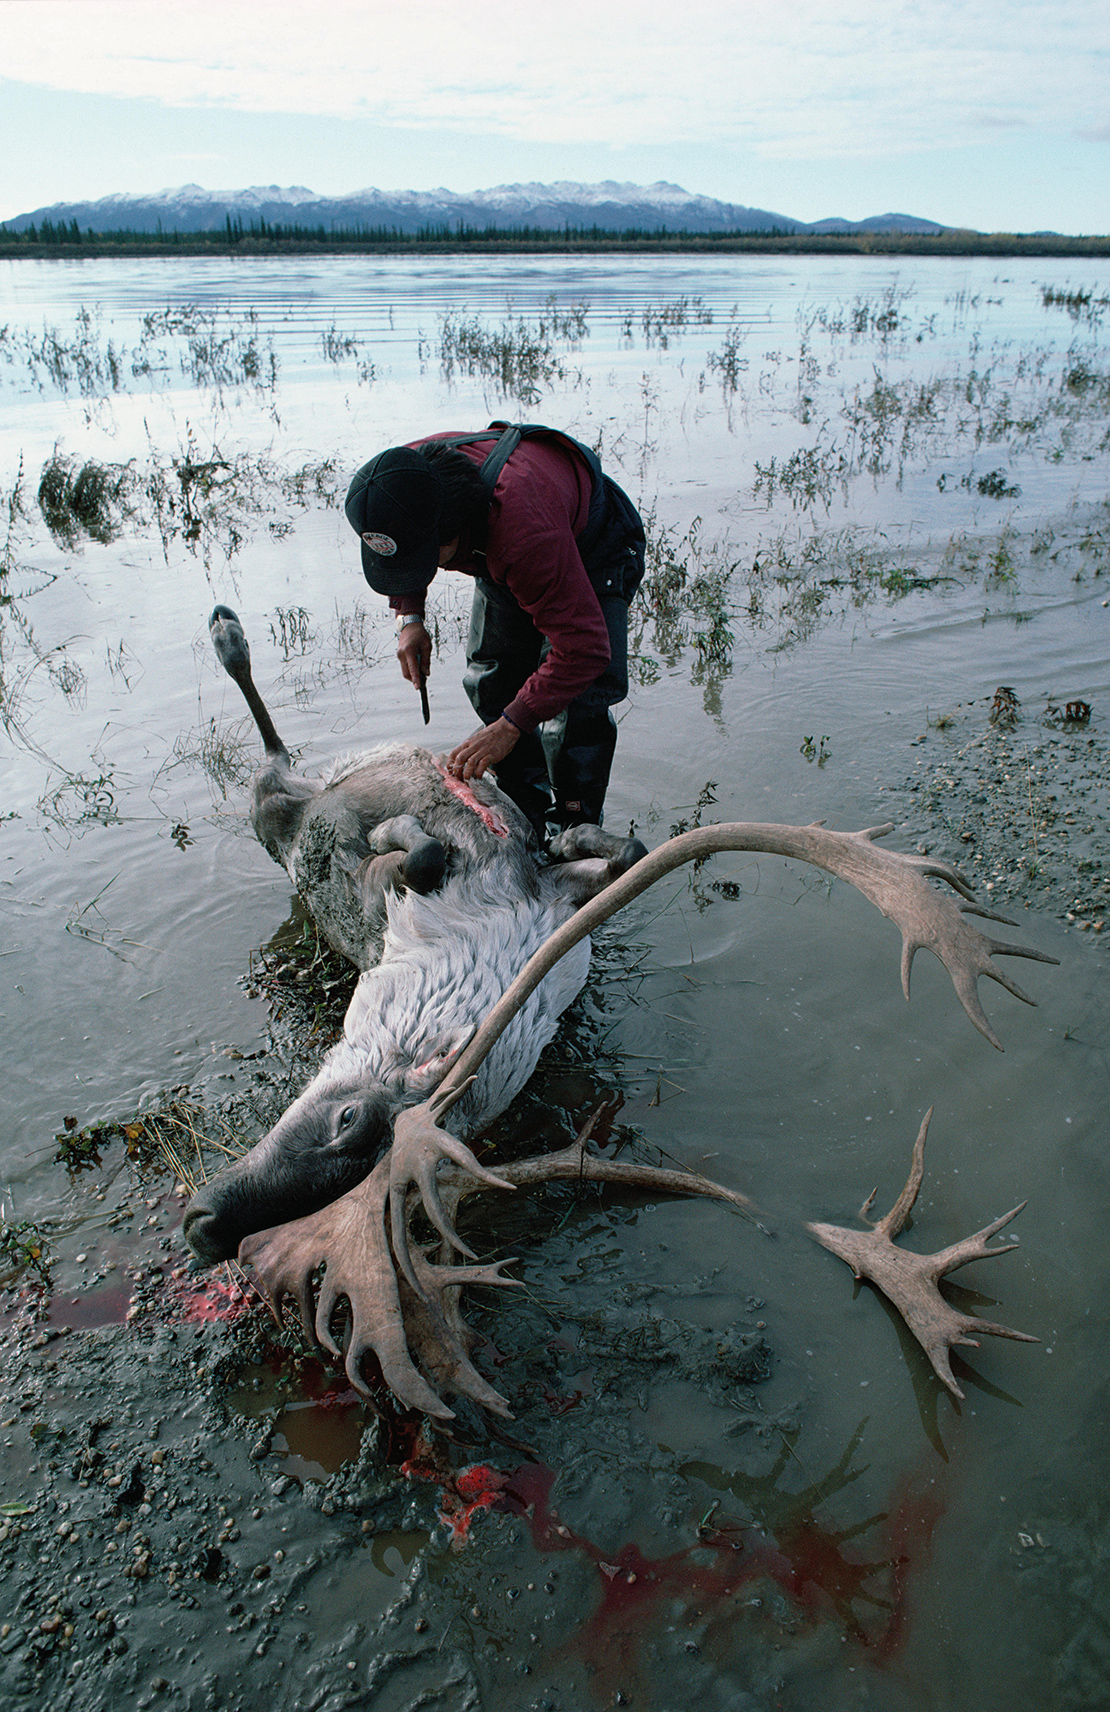 The Gwich’in have relied heavily on the strength and vitality of the Porcupine caribou herd for thousands of years for their food security. Credit: Minden Pictures.